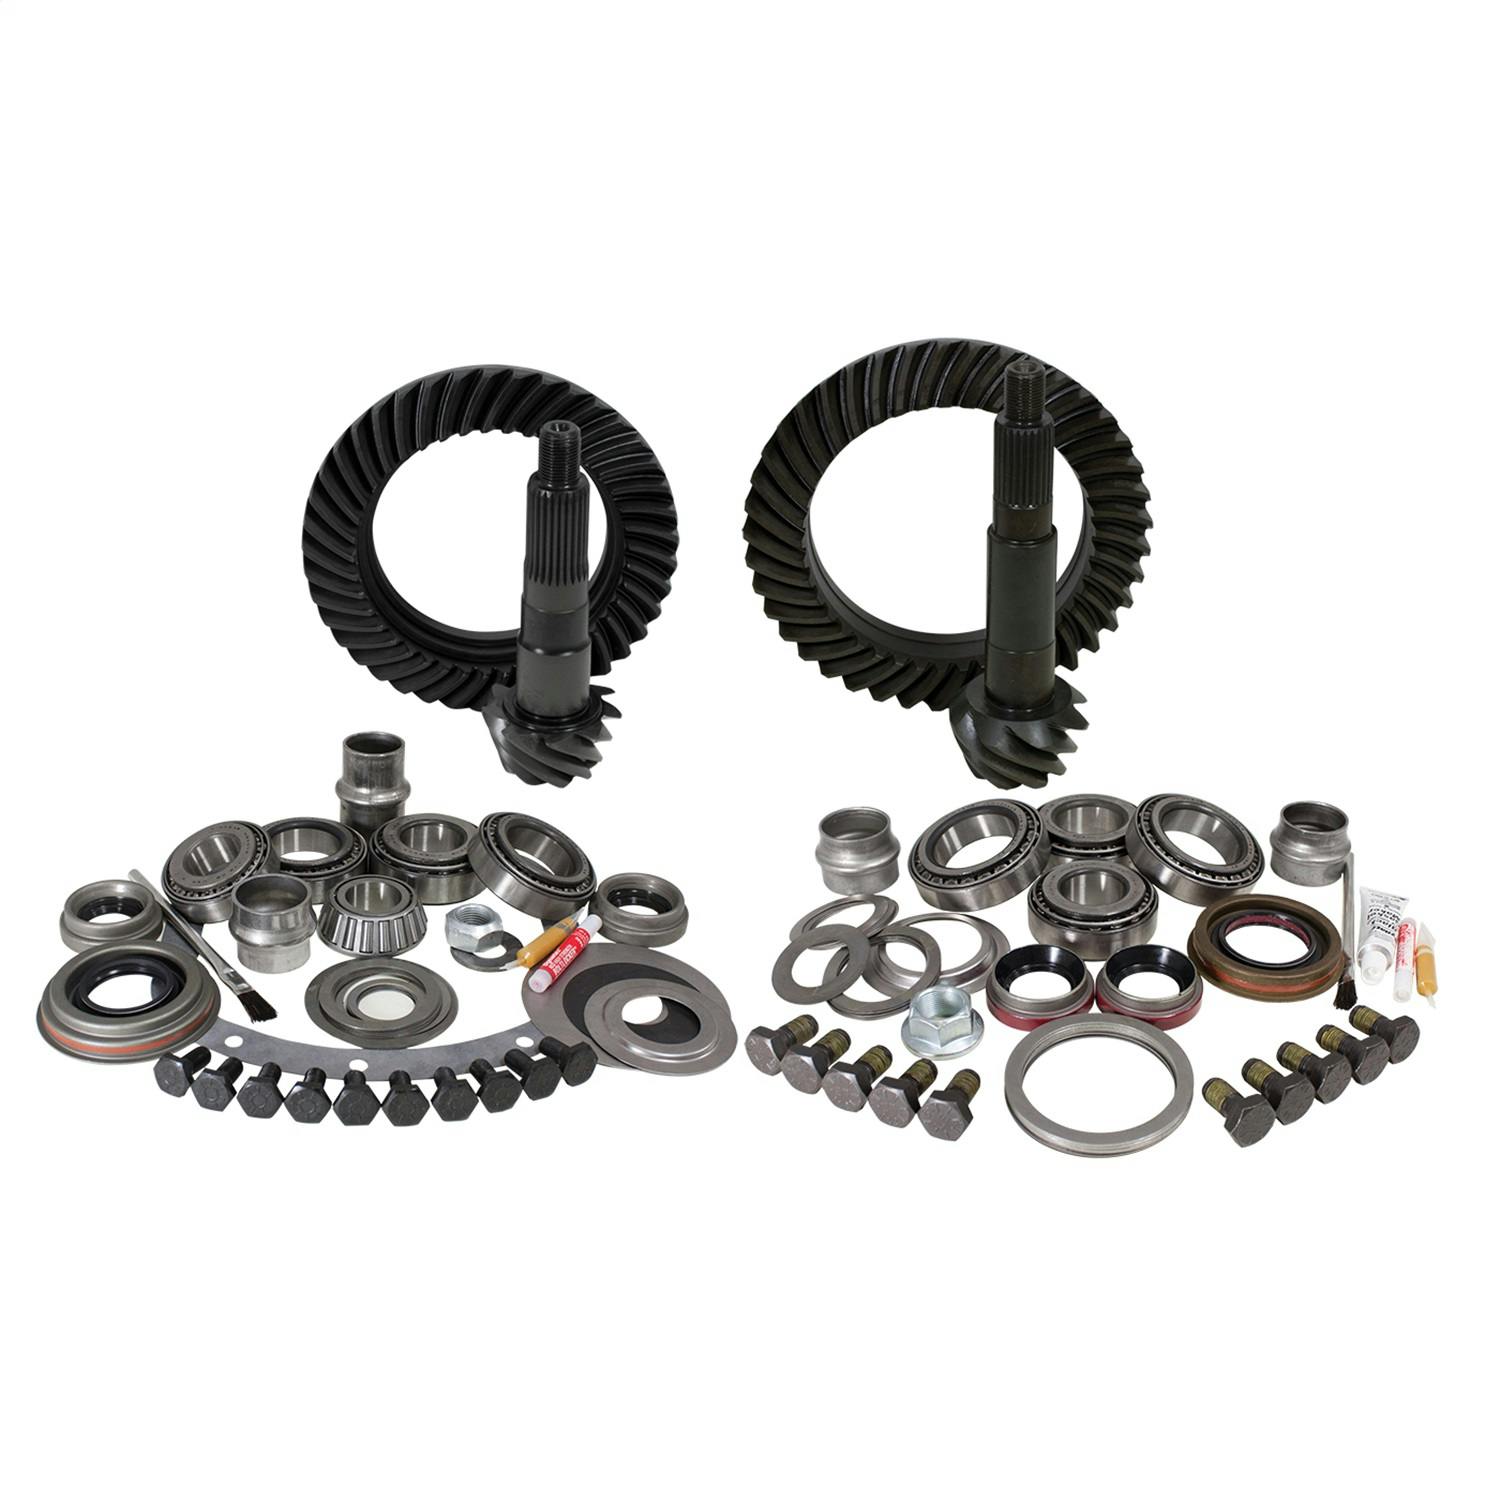 USA Standard Gear ZGK013 Ring And Pinion Set And Complete Install Kit